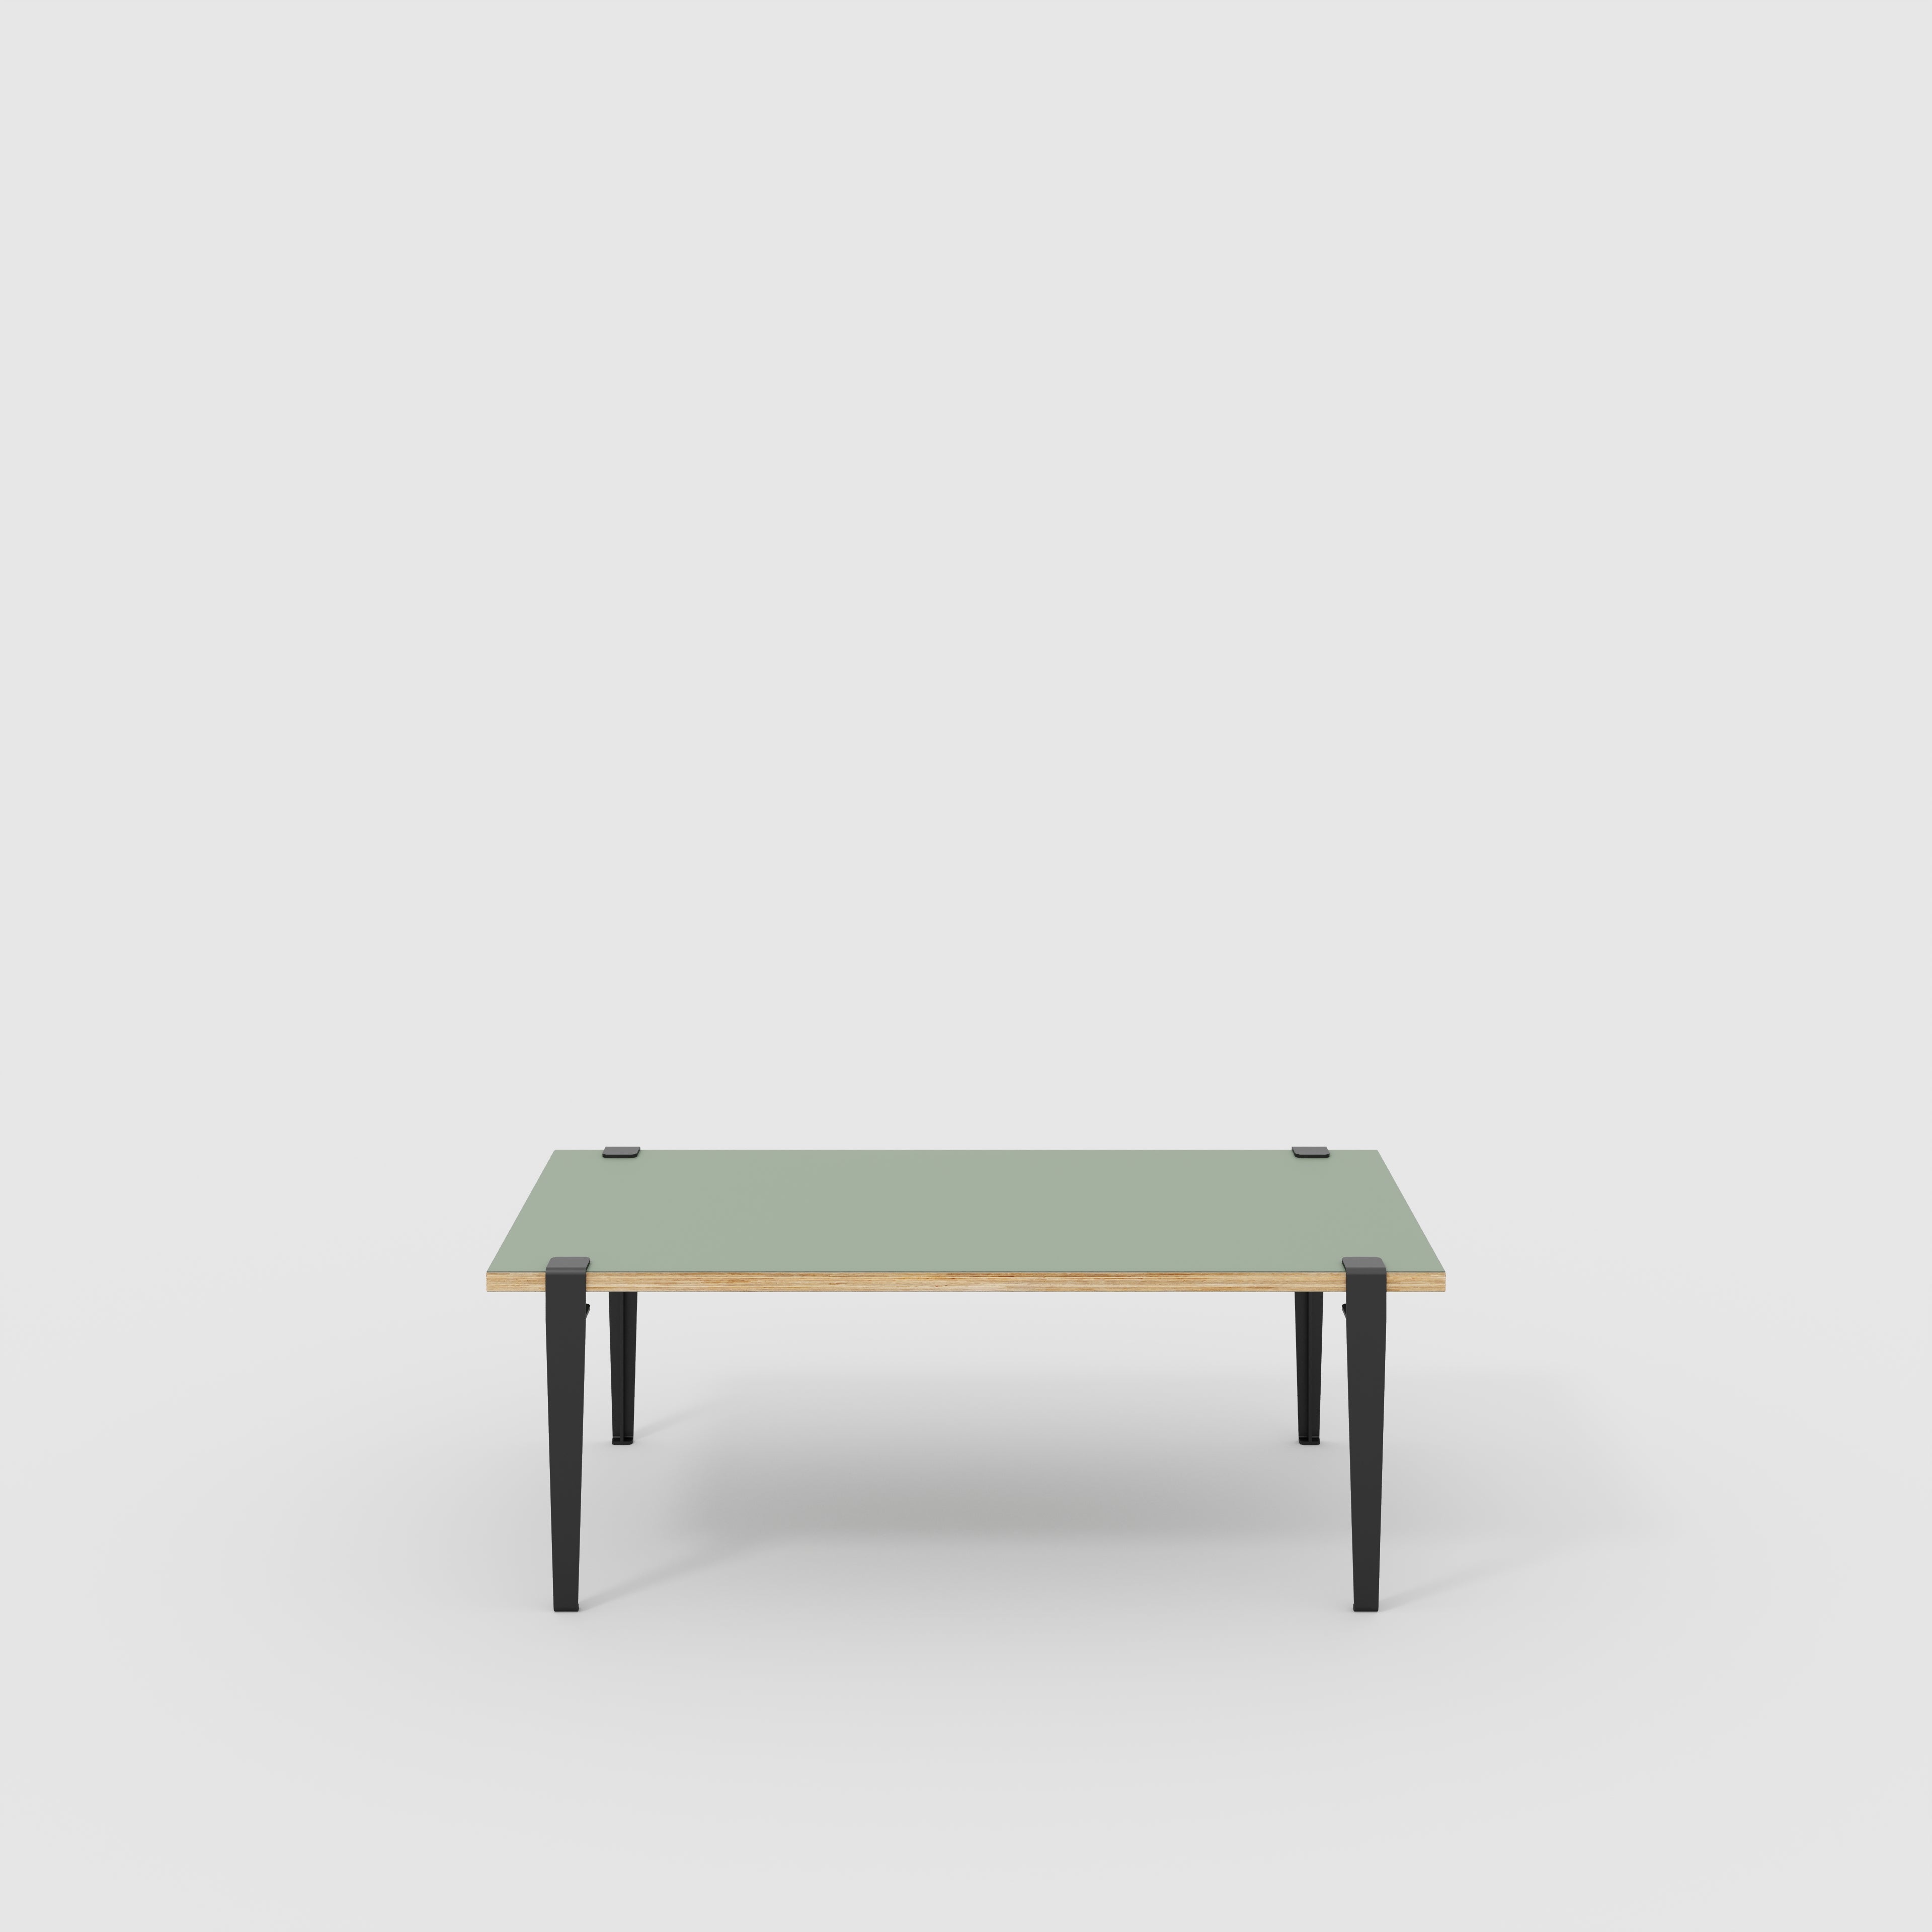 Coffee Table with Black Tiptoe Legs - Formica Green Slate - 1200(w) x 600(d) x 430(h)